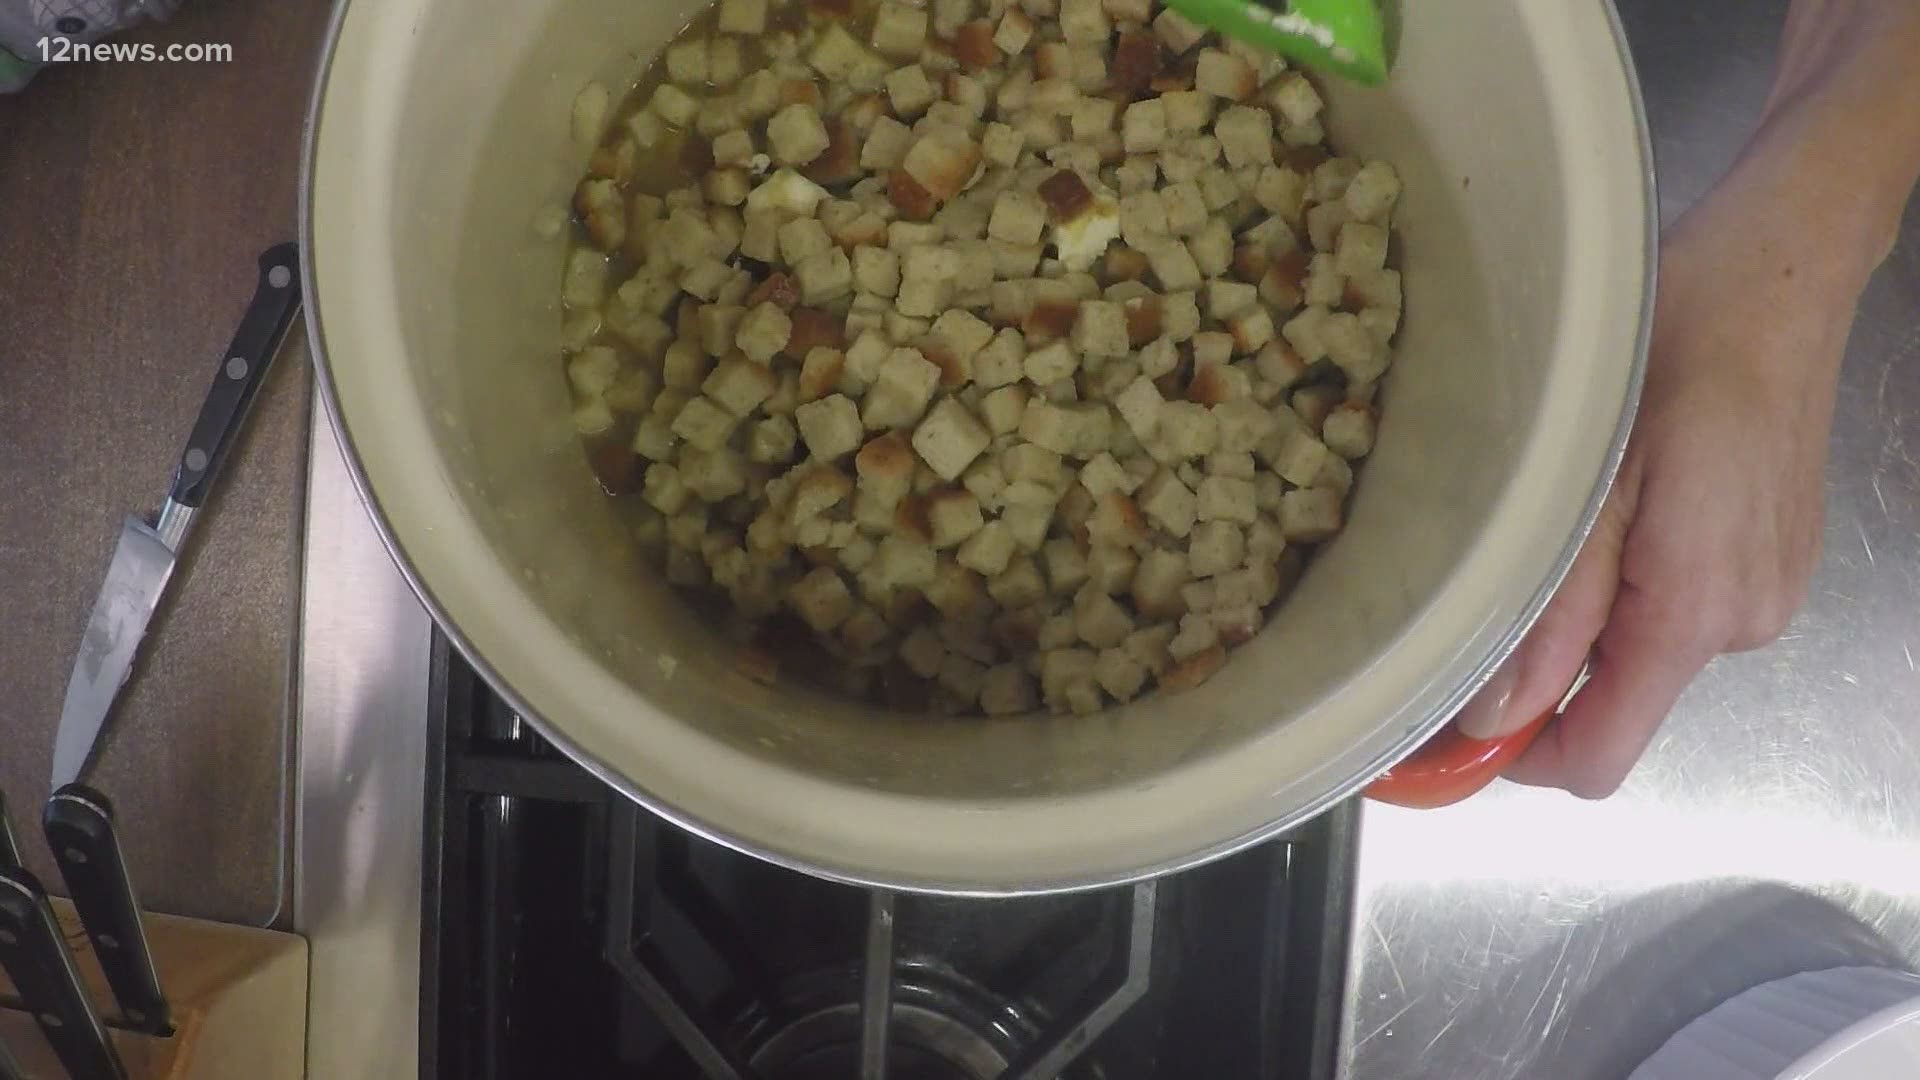 Team 12's Rachel McNeill is taking us along as she makes her mother's spicy oyster stuffing for the holidays.